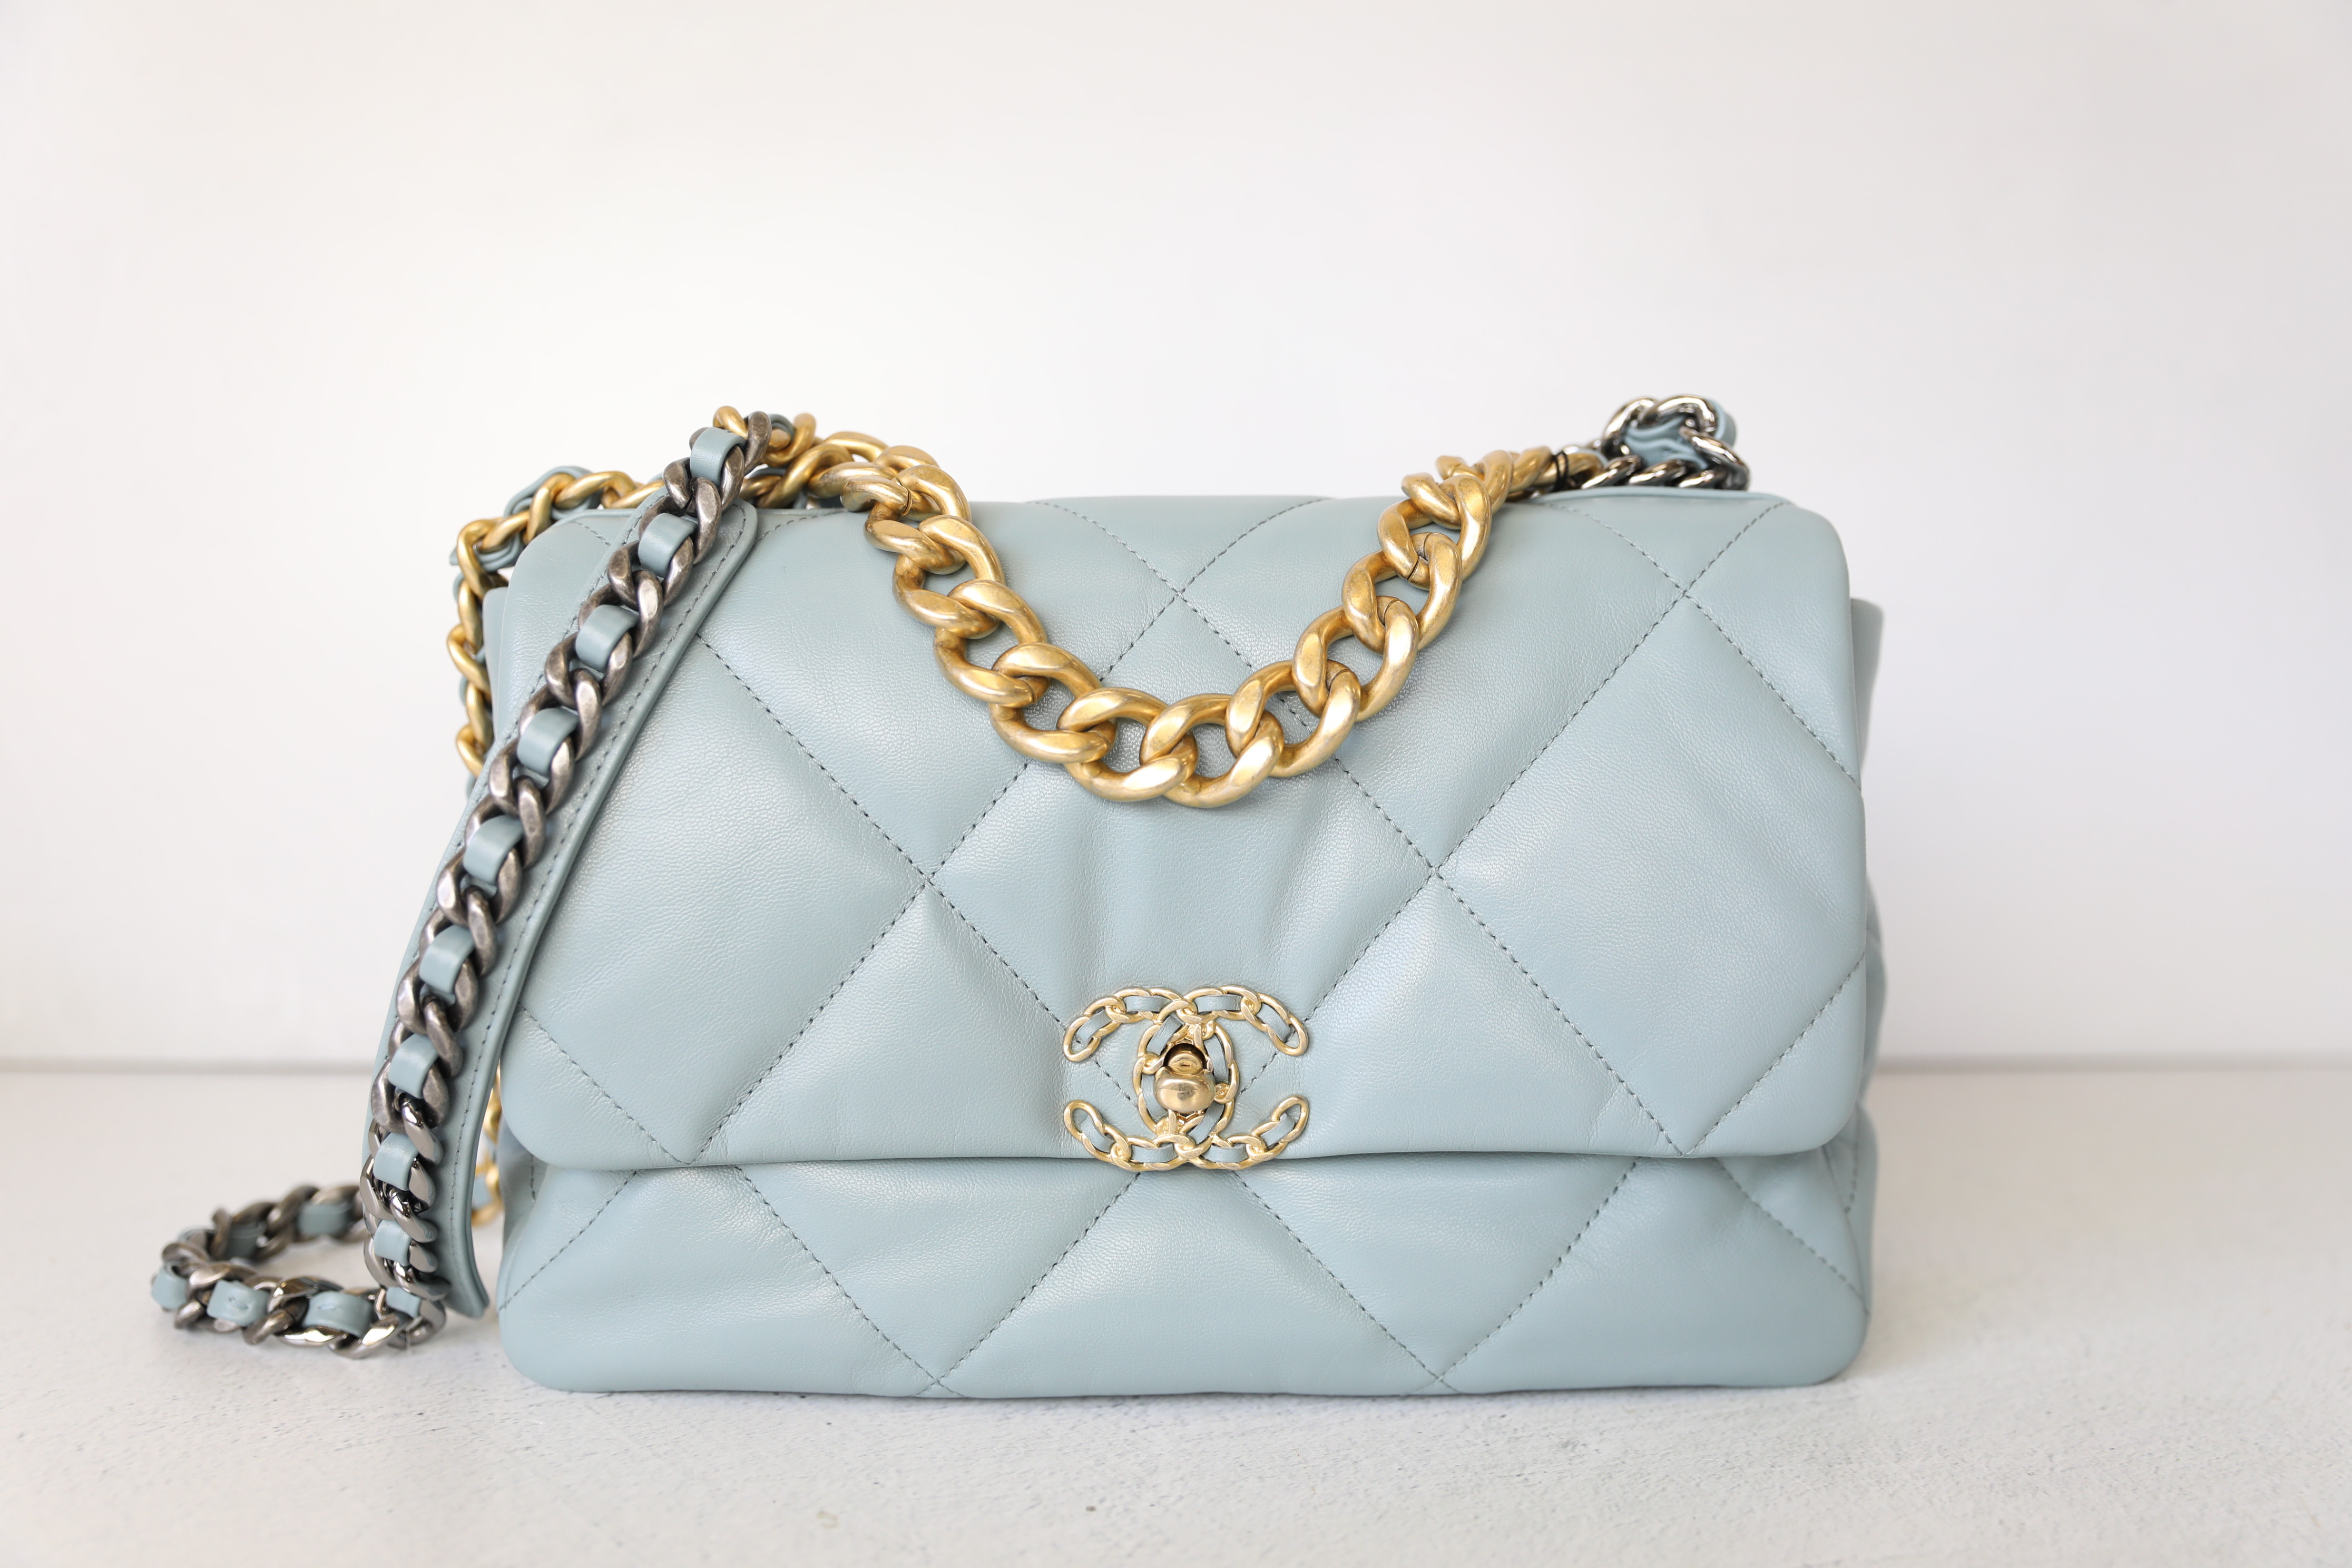 Chanel 19 Large, Blue, Preowned in Box WA001